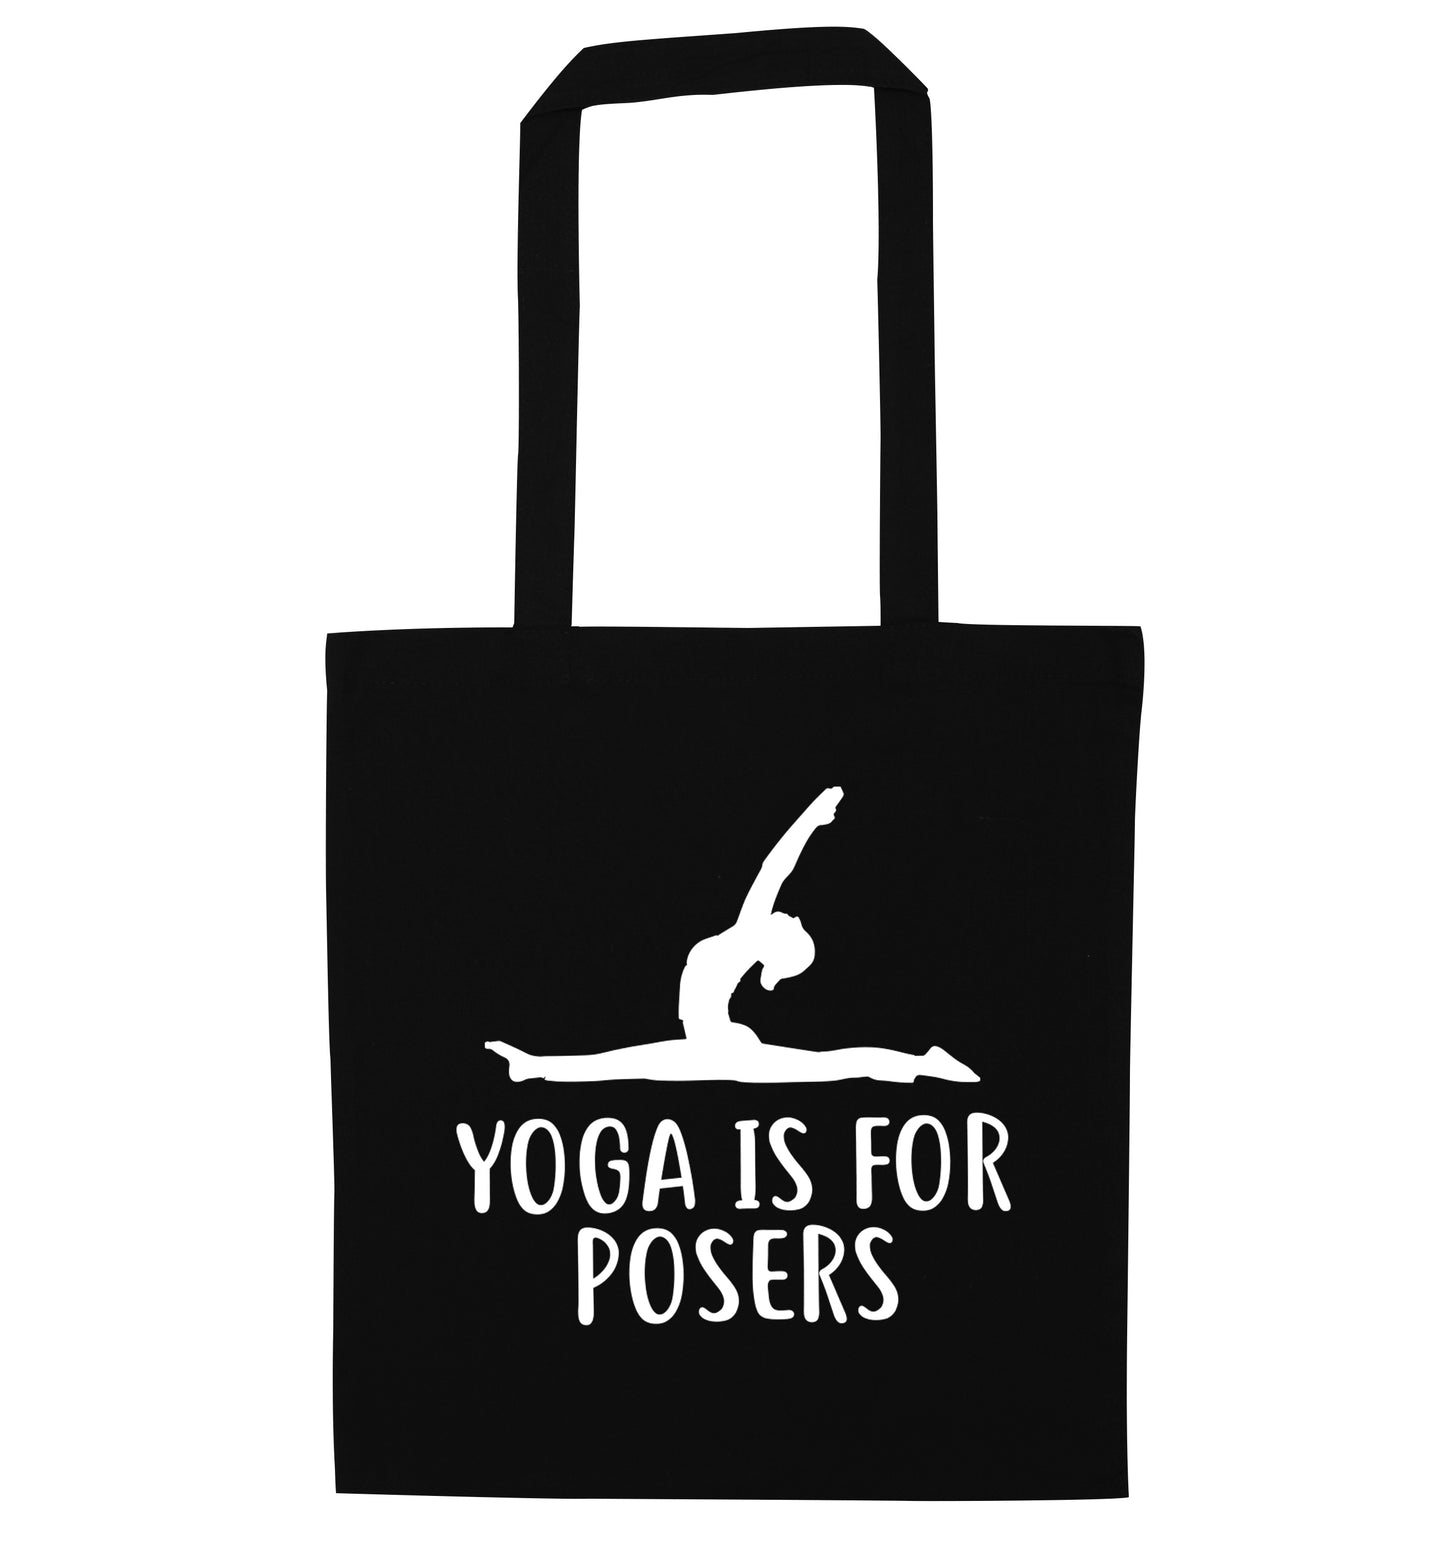 Yoga is for posers black tote bag